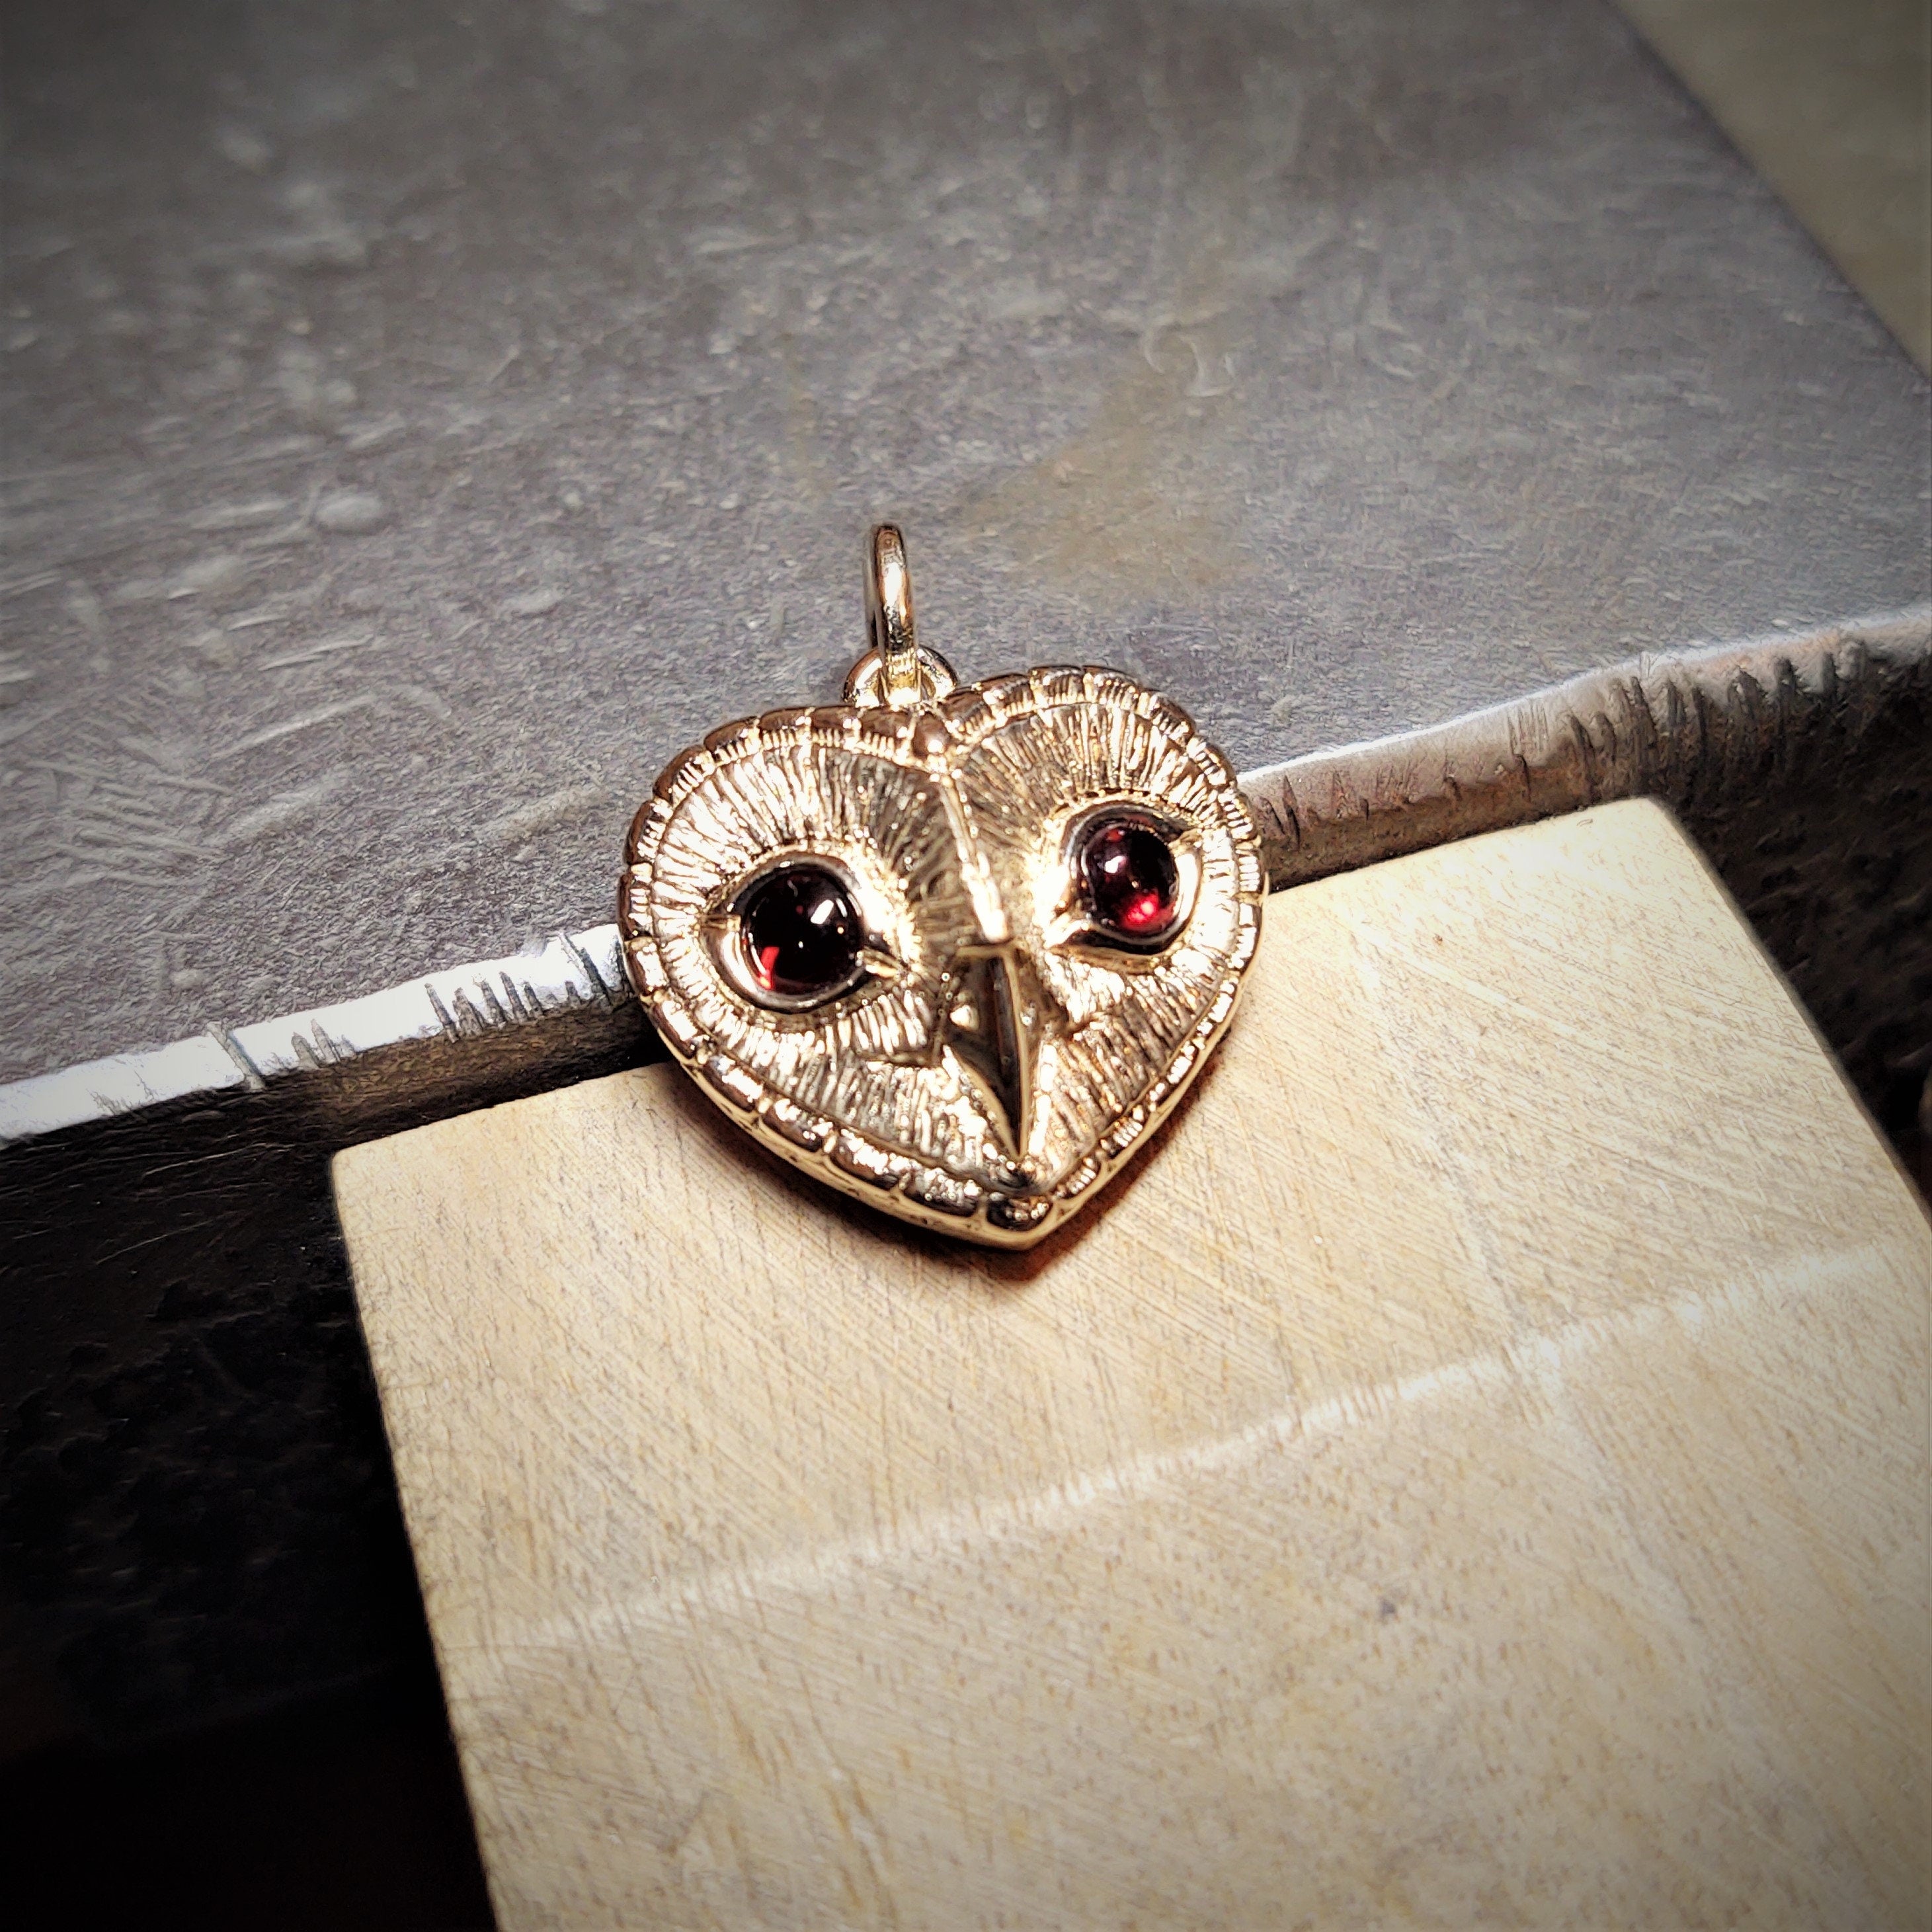 Buy 14k Gold Plated Owl Pendant Necklace, Womens Mens Owl Necklace,  Stainless Steel Owl Jewelry Necklace Online in India - Etsy